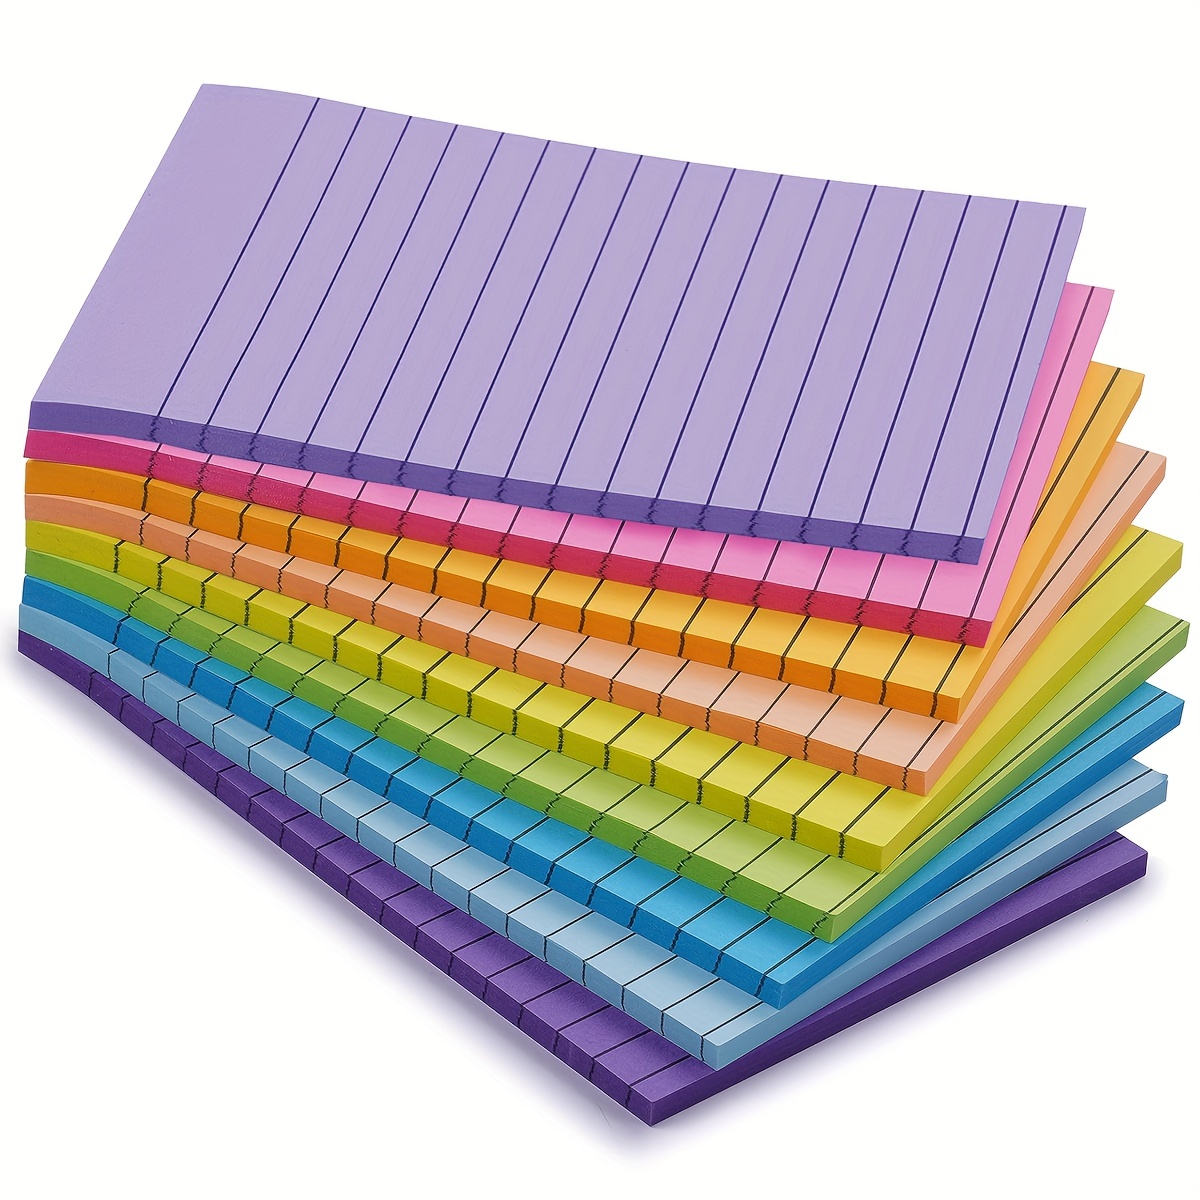  EOOUT 300 Sheets Pastel Transparent Sticky Notes, 6 Pads, 3x3  Inch, 6 Colors Clear Translucent Adhesive Self-Sticky Notes for Bible /  Book Tabs, School Supplies for College, Office : Office Products